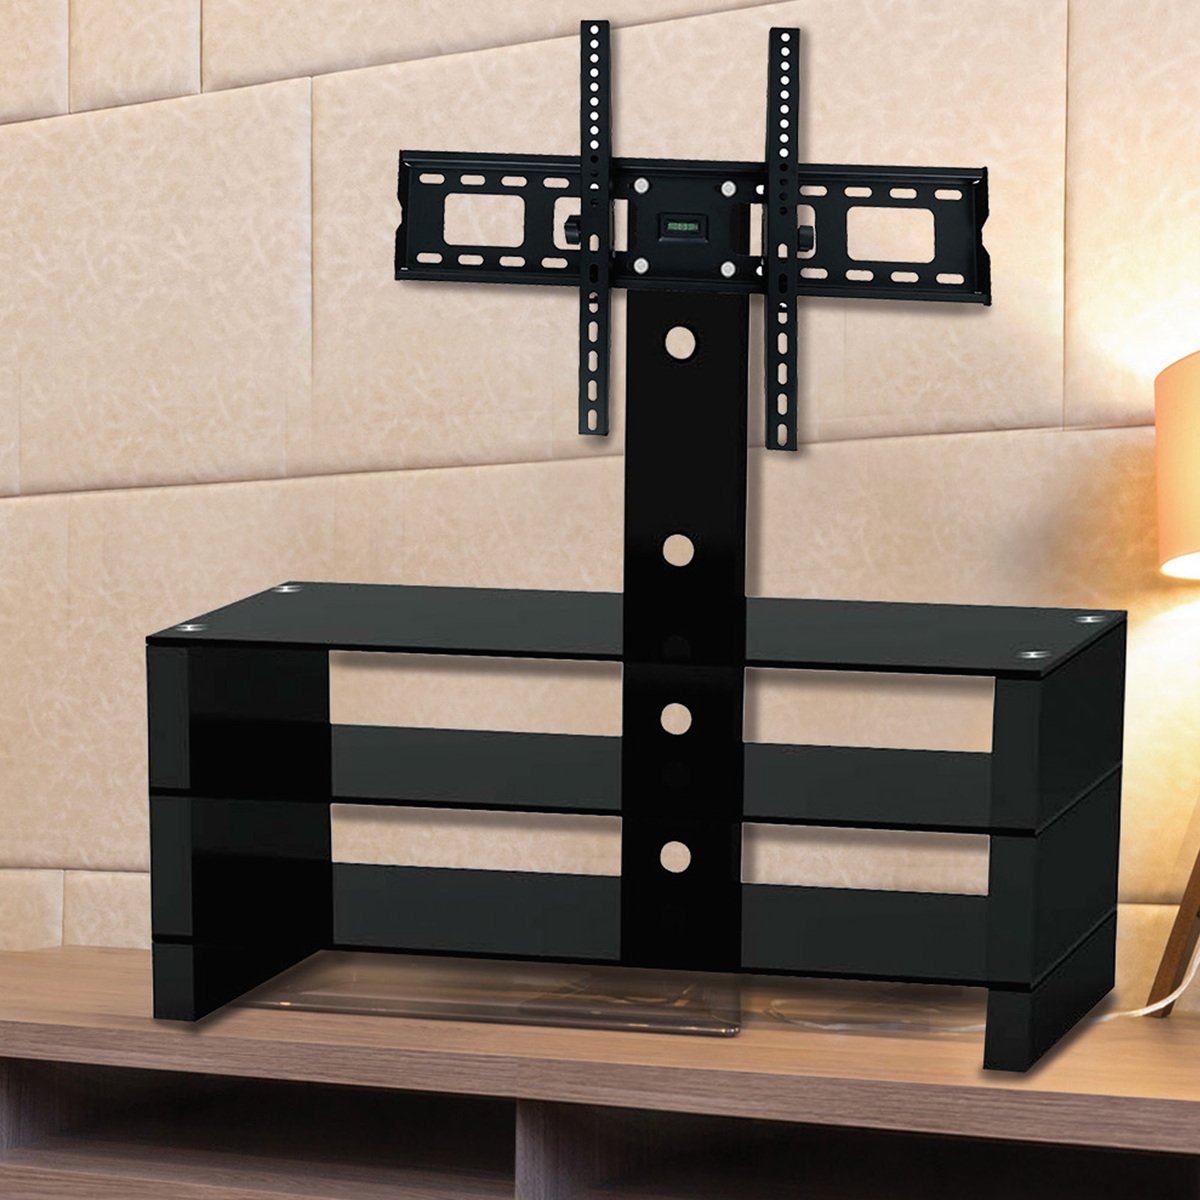 Maple Leaf TV Stand With Wall Bracket TV151-1